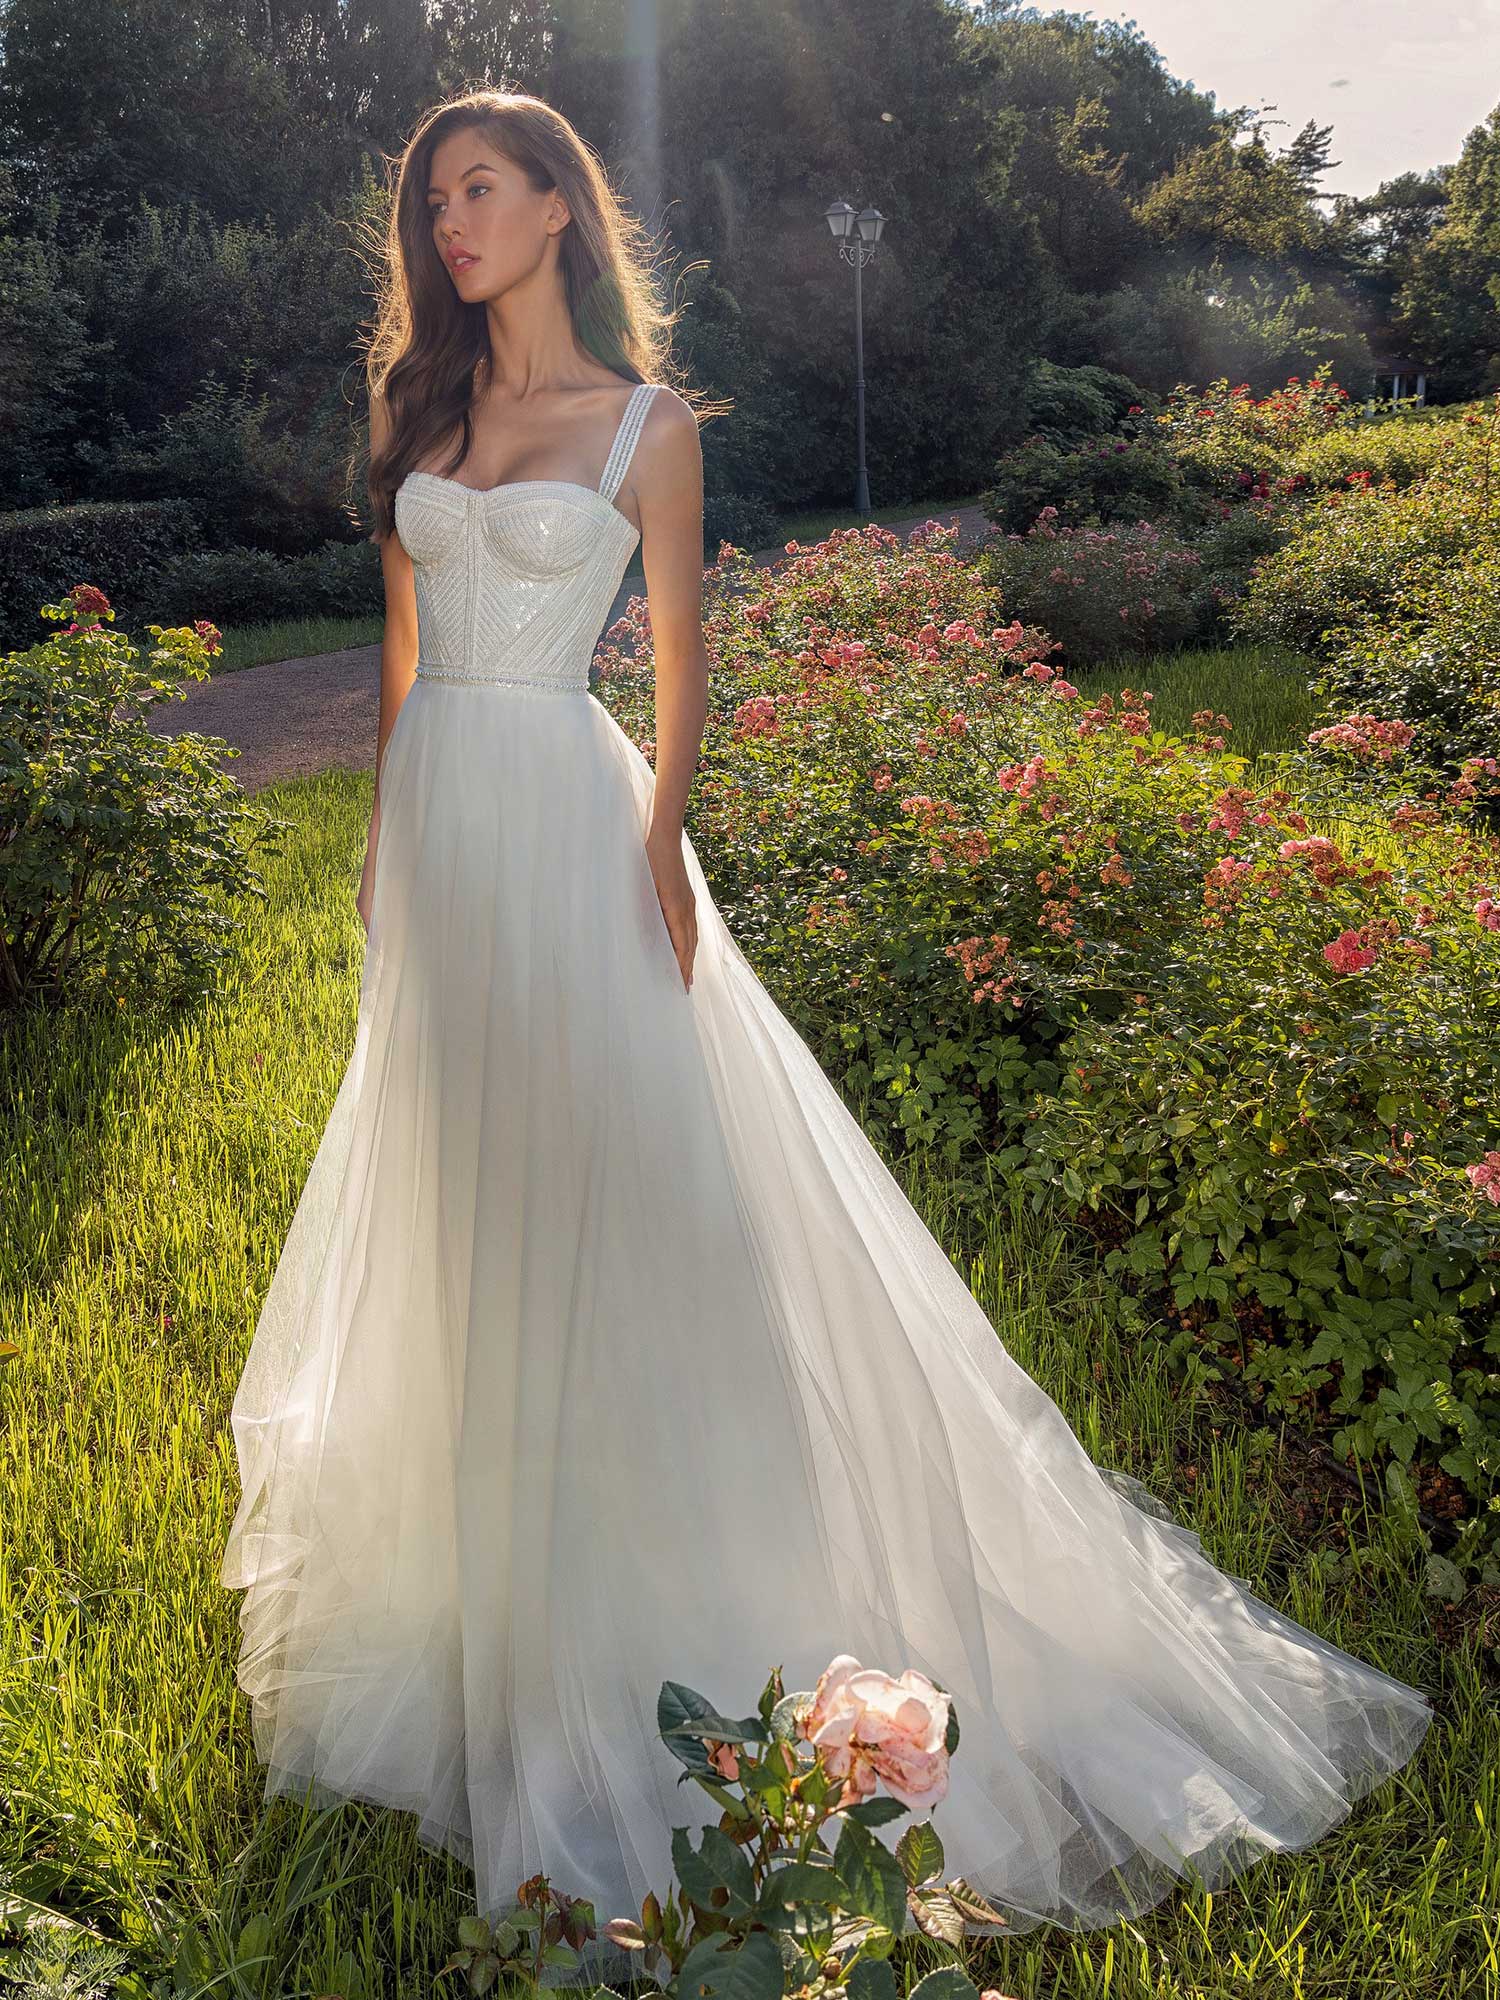 Styles Of Wedding Dresses Top Review styles of wedding dresses - Find ...